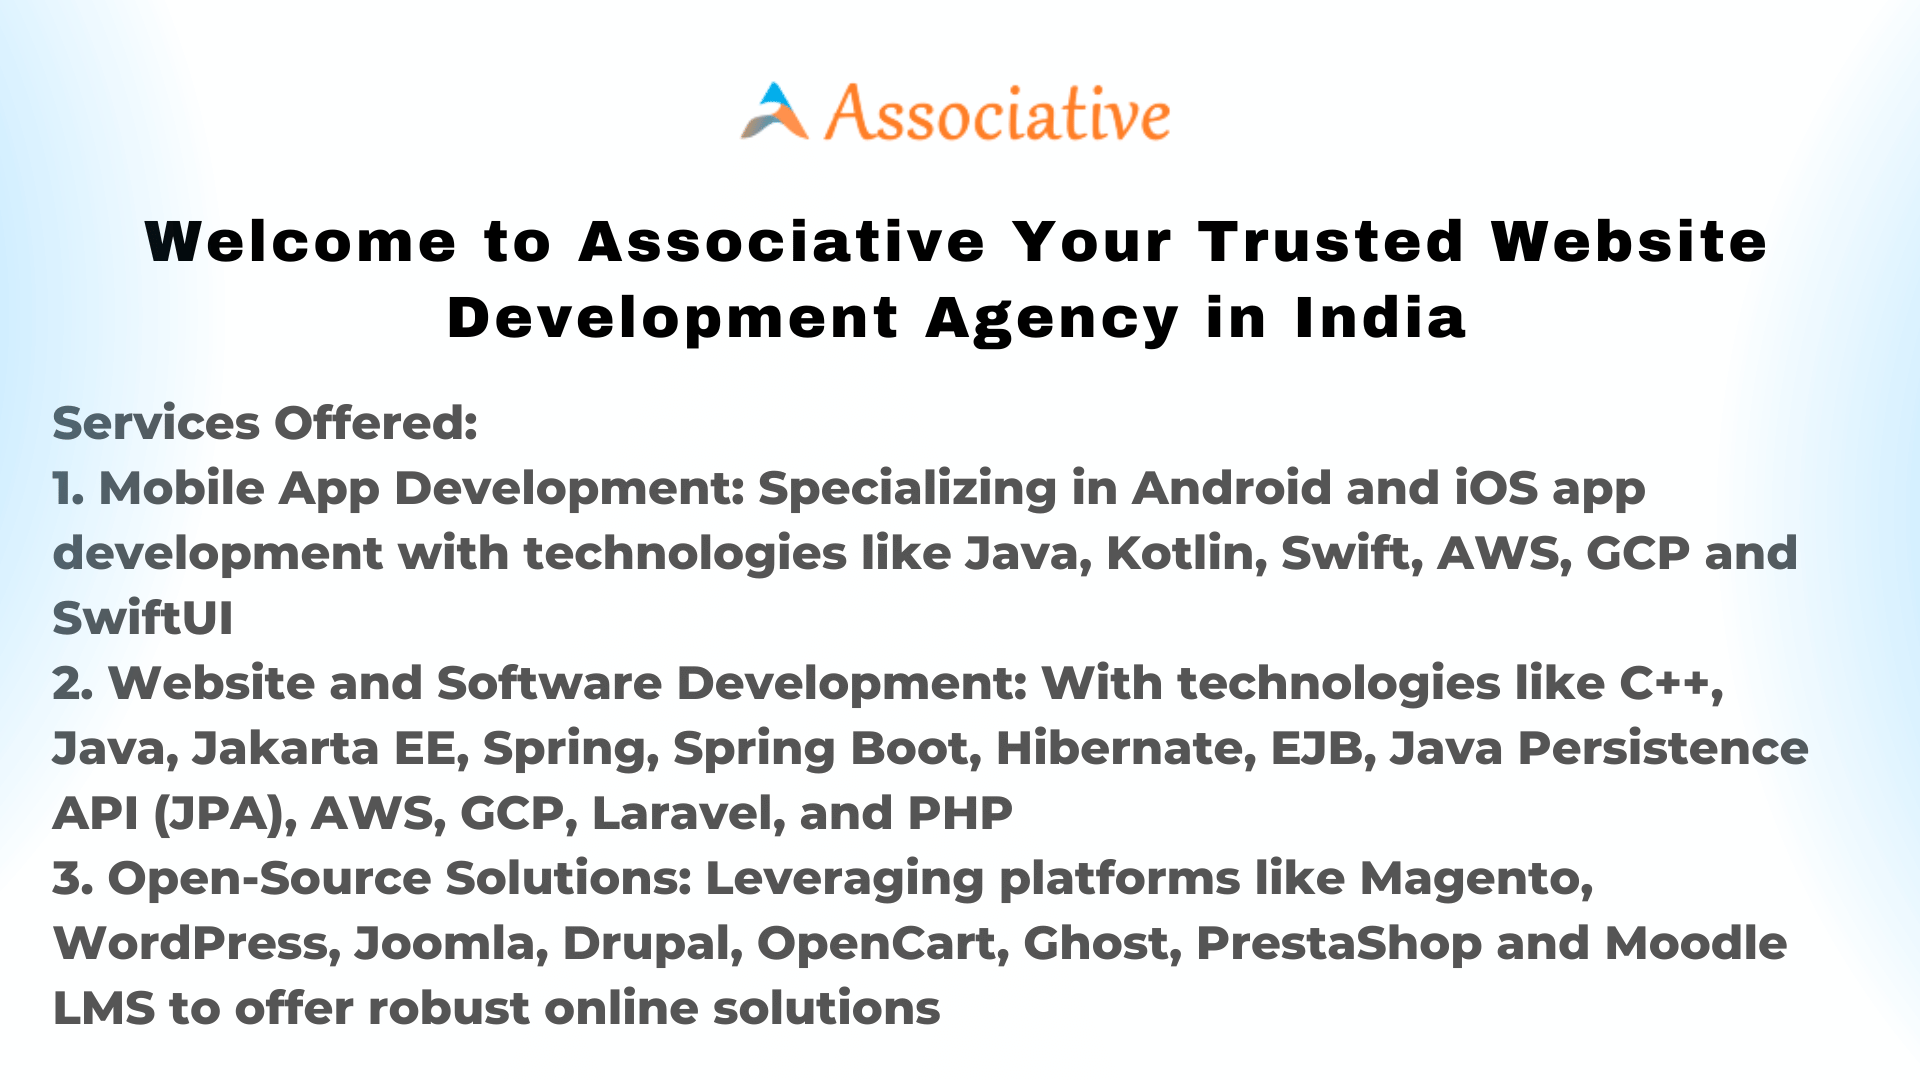 Welcome to Associative Your Trusted Website Development Agency in India